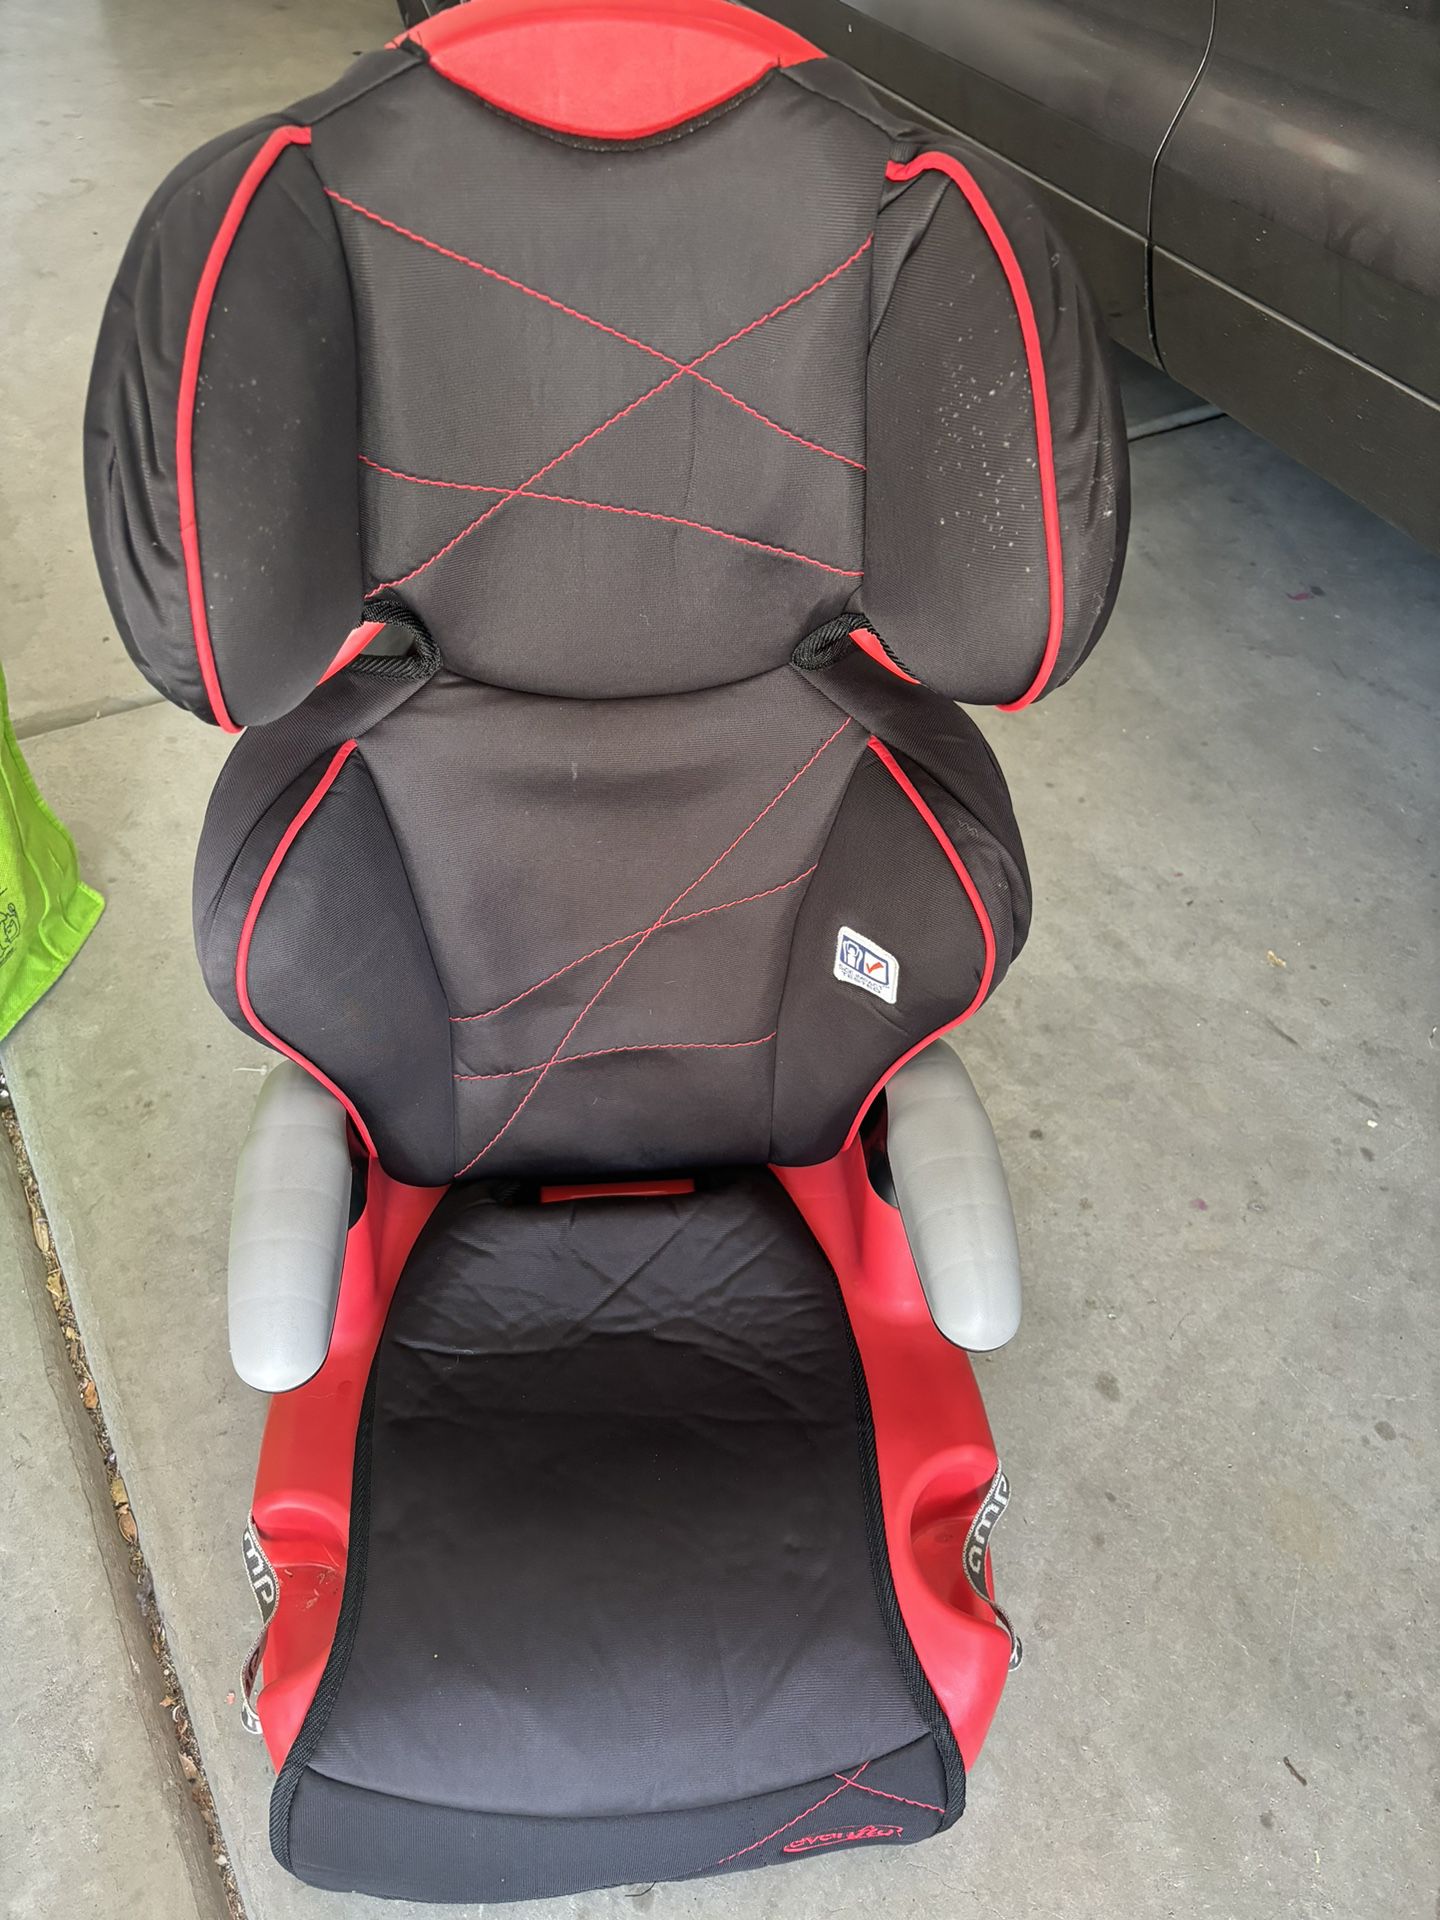 Evenflo 2 In 1 Booster Seat 